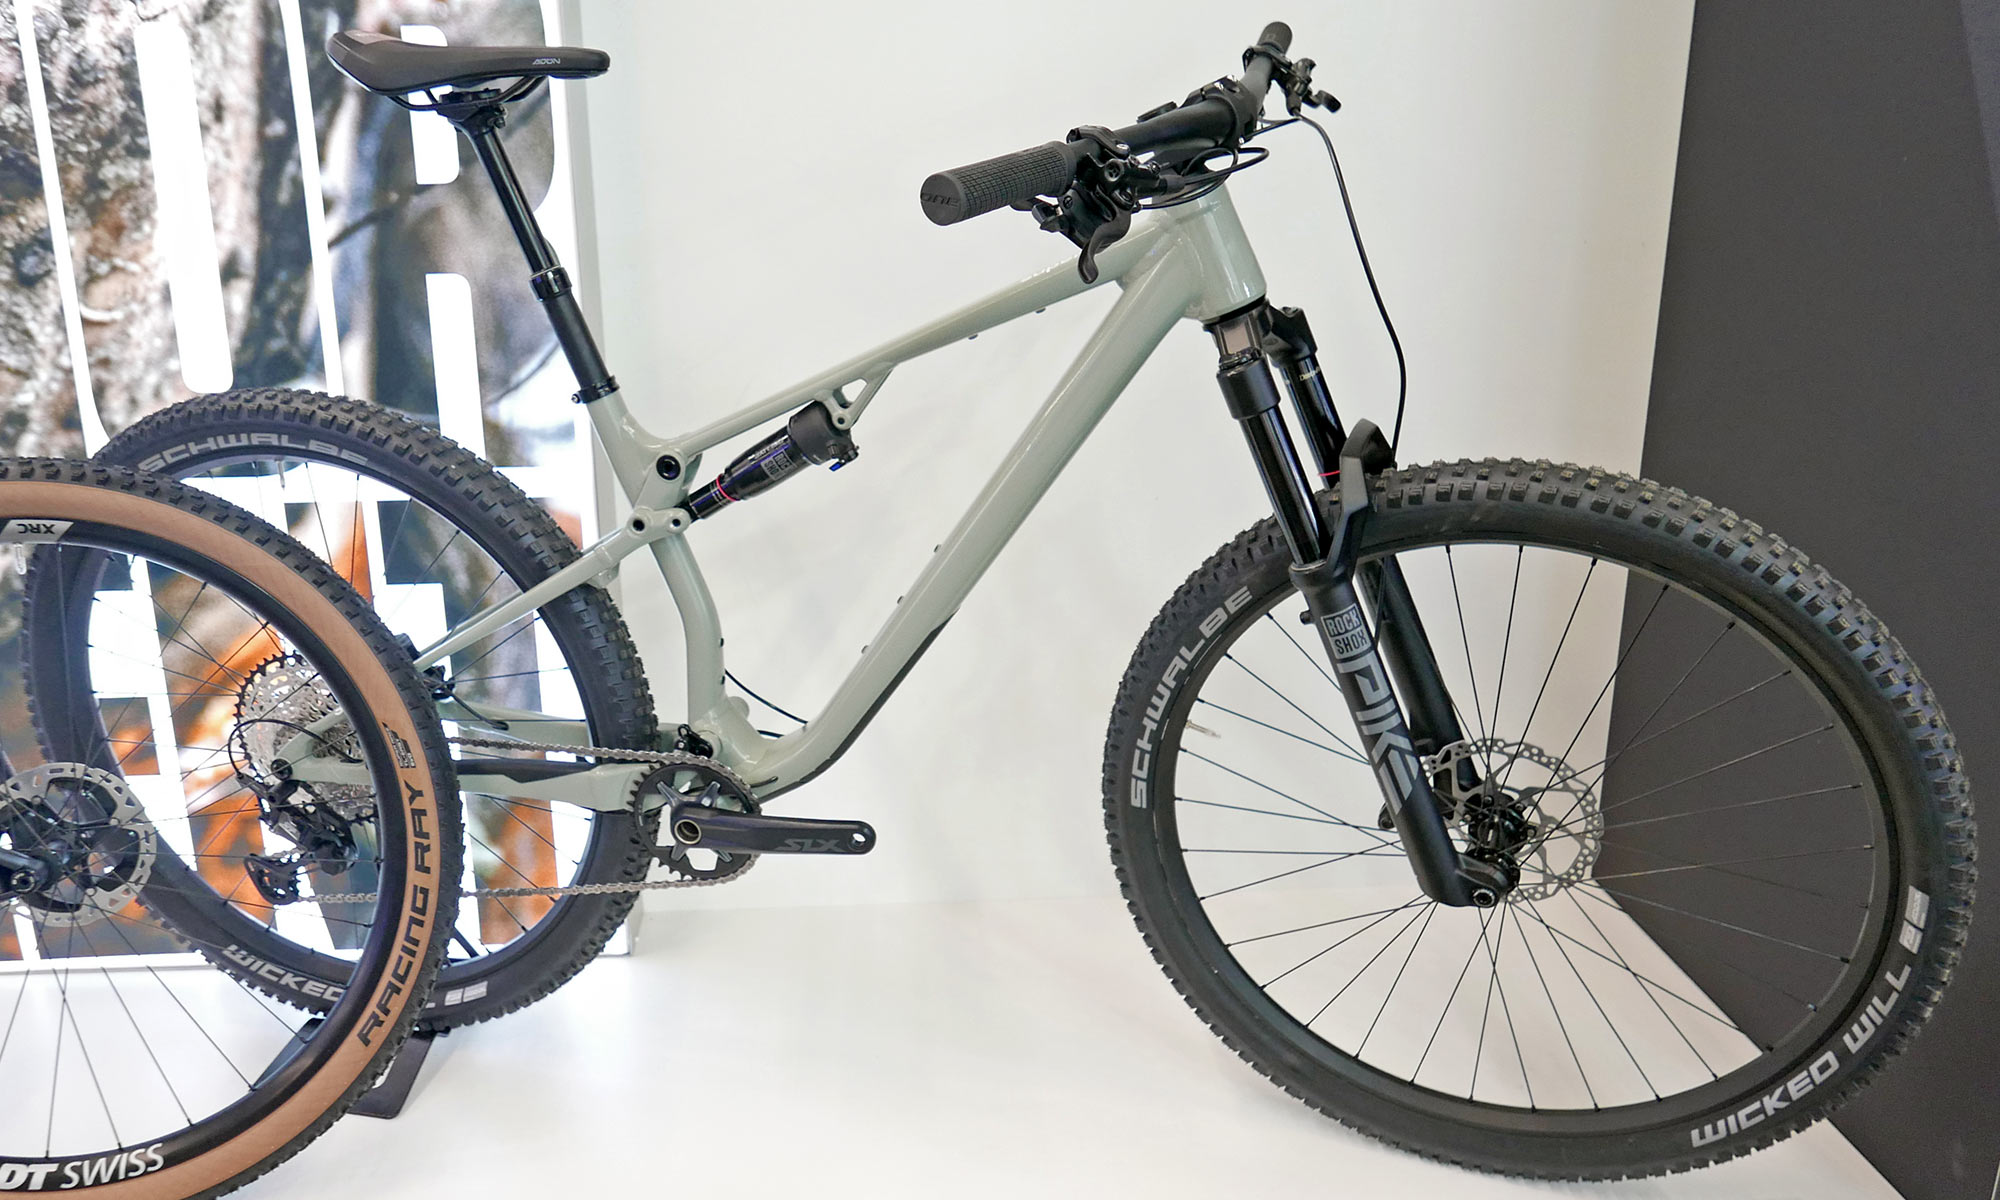 New XF DC carbon or alloy downcountry trail bikes, aluminum